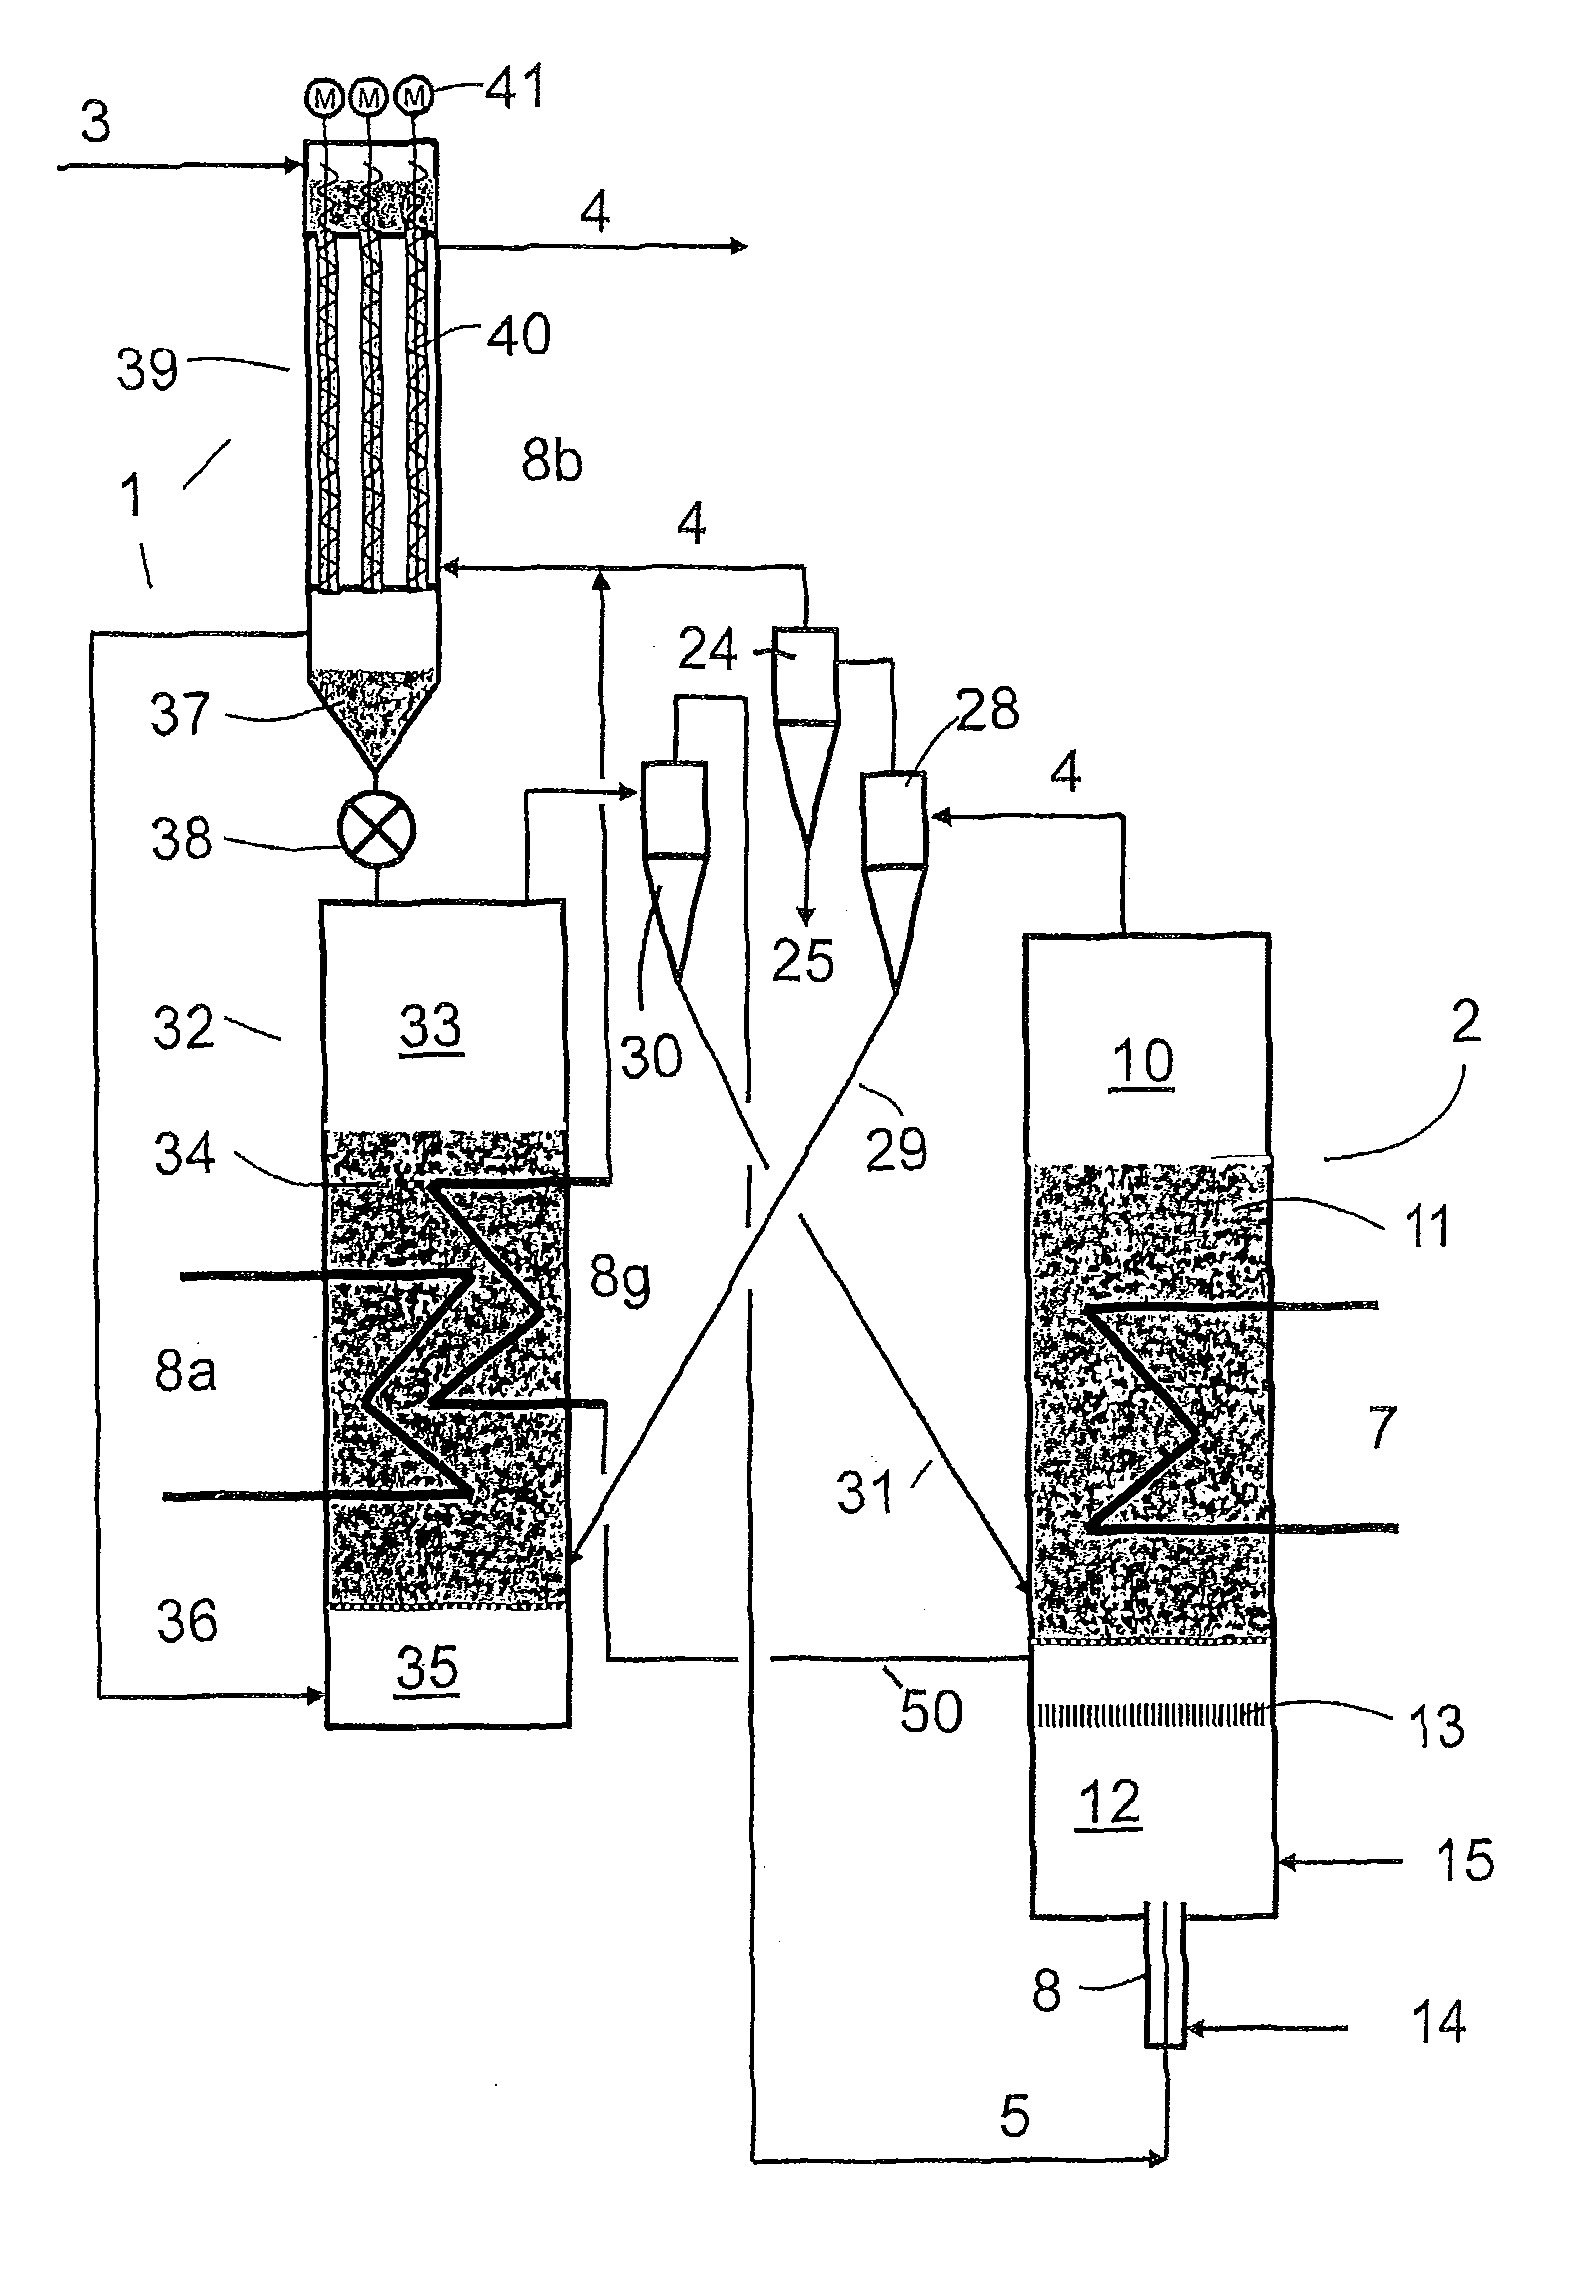 Method and device for producing synthesis gas from biomass